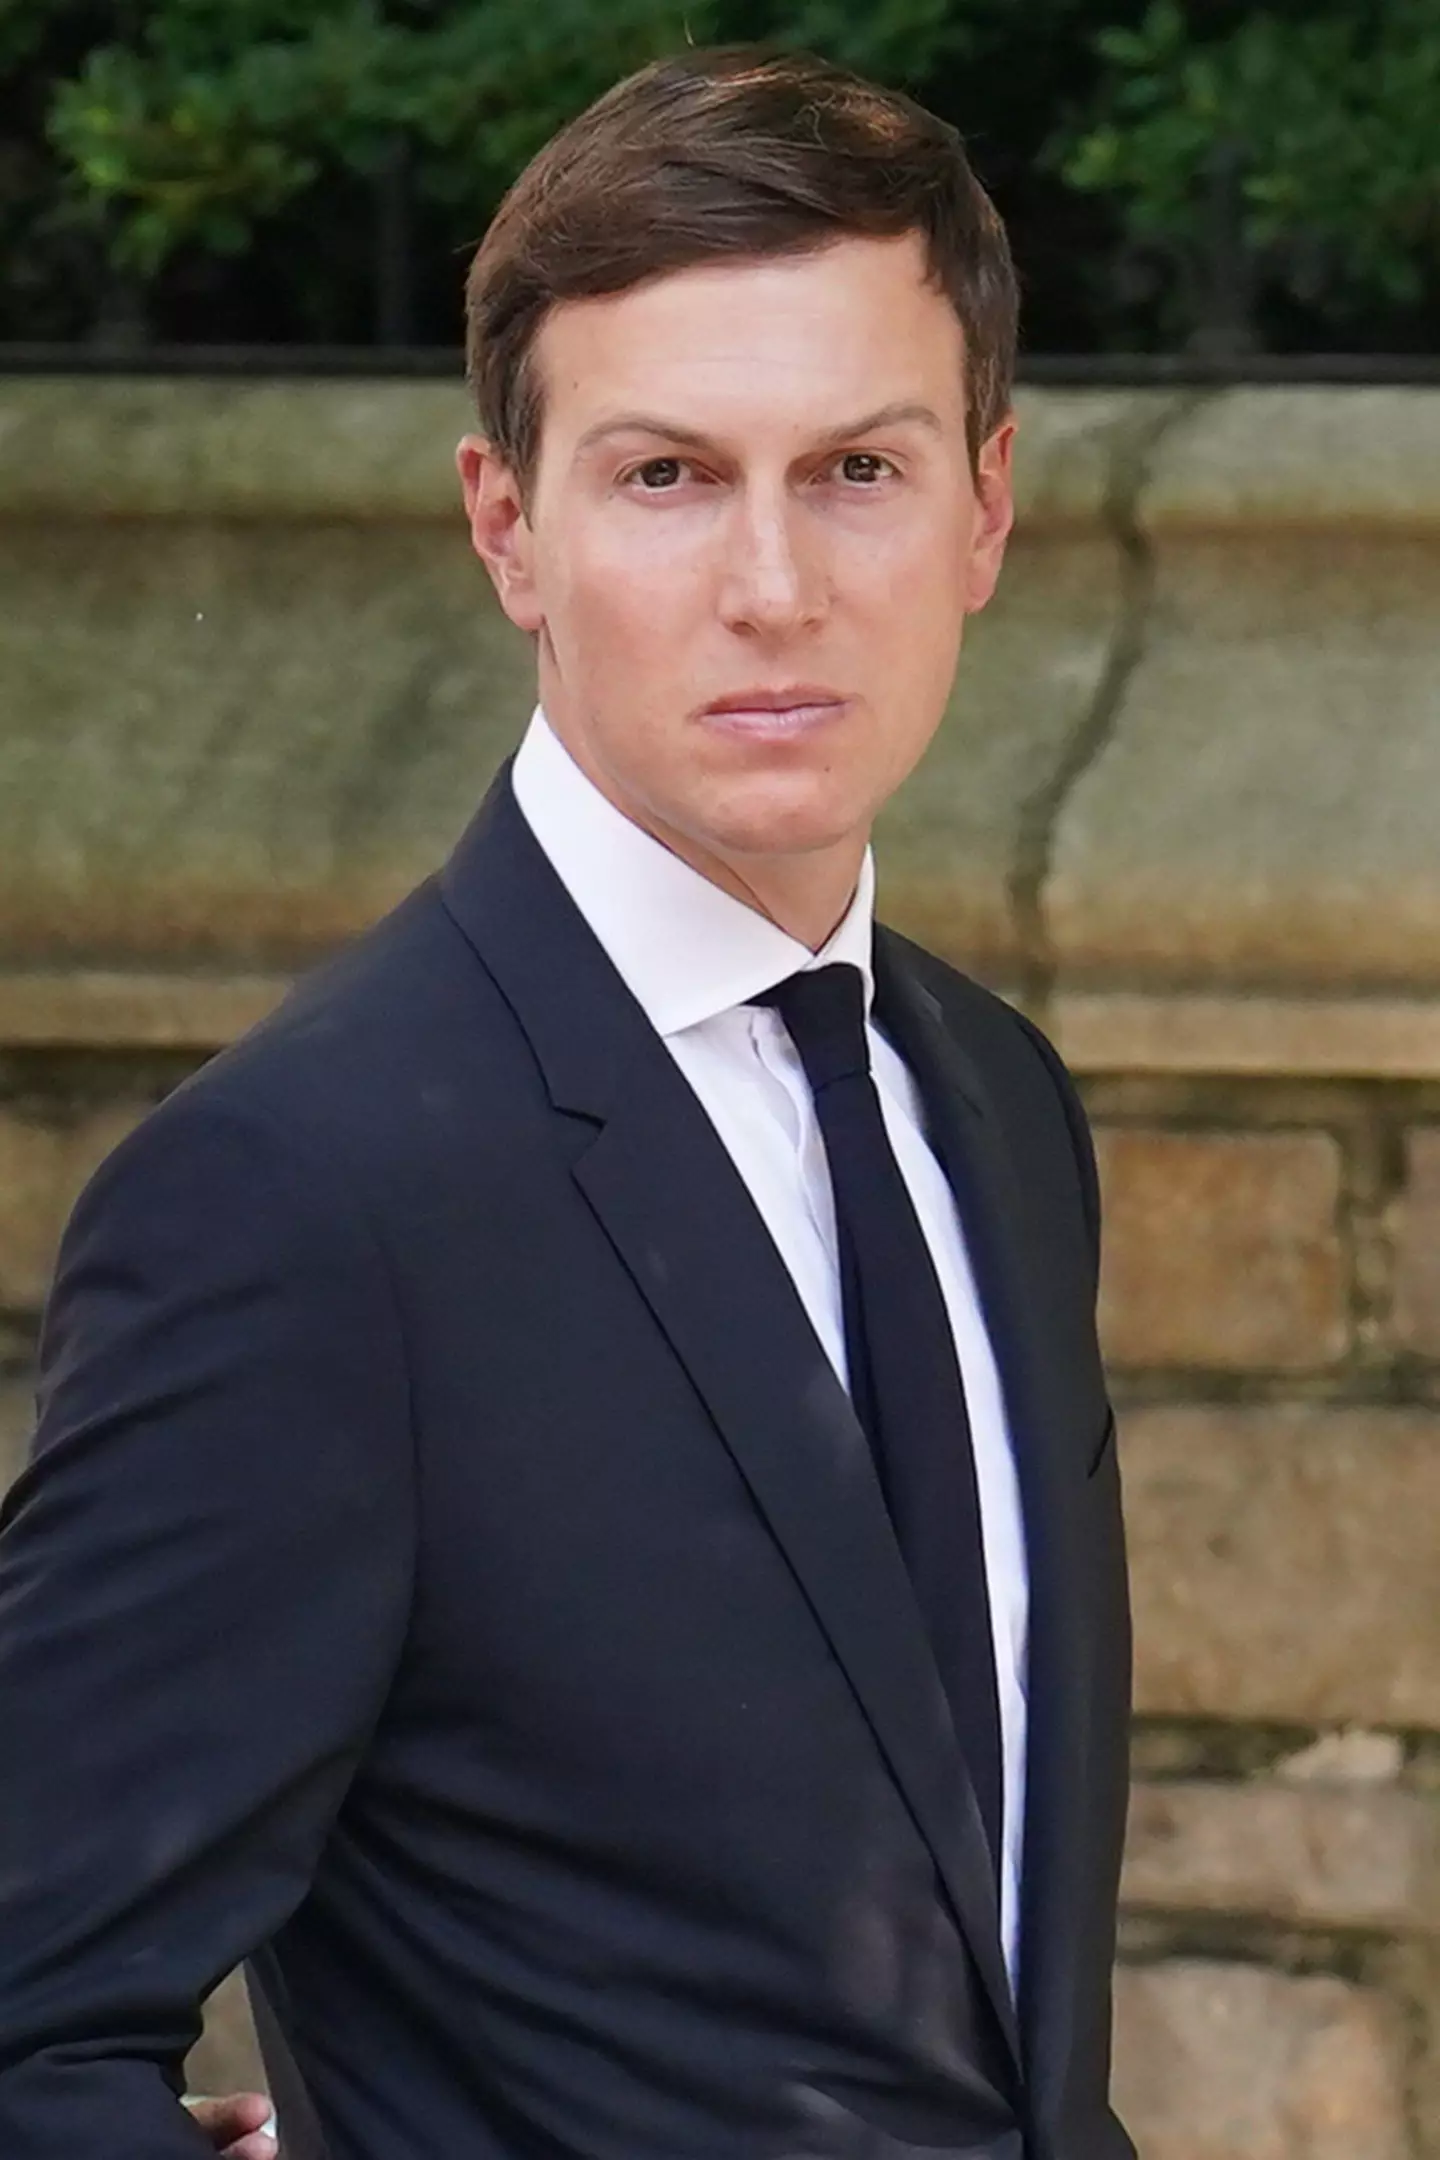 Jared Kushner revealed he has tried to exercise more since leaving the White House.